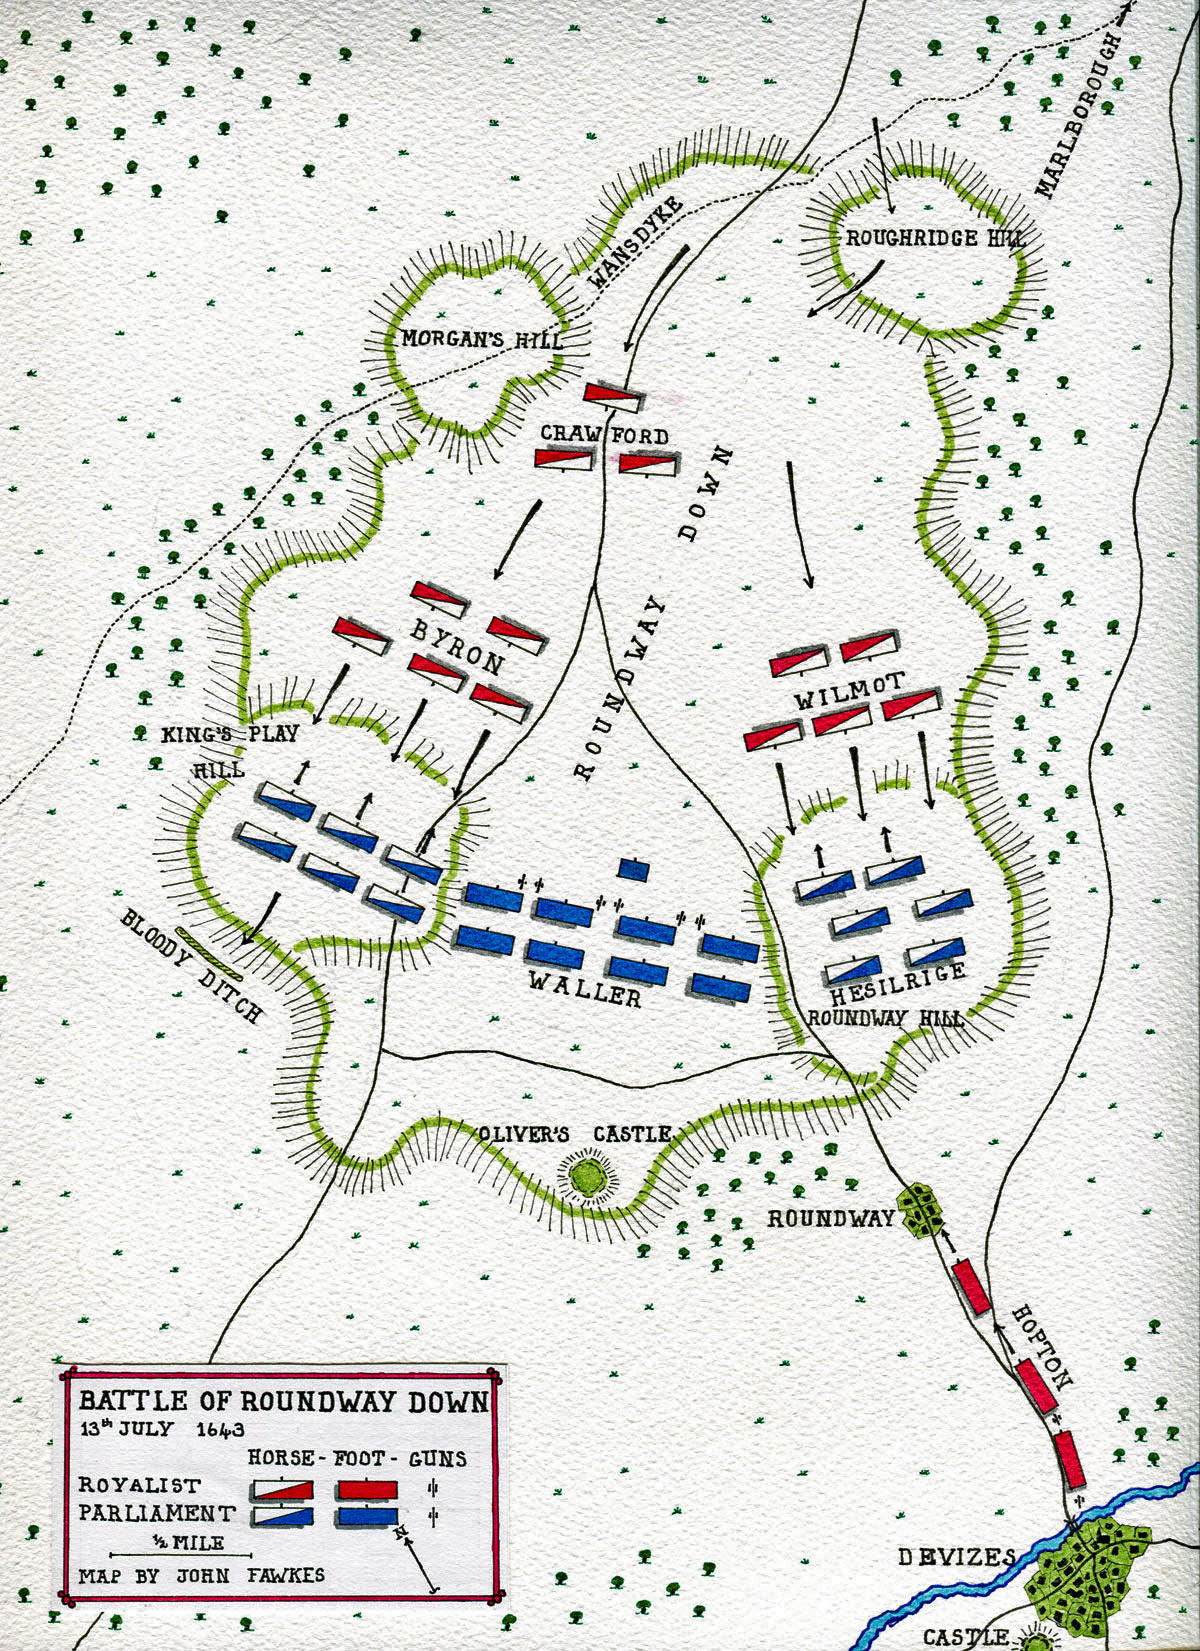 Map of Battle of Roundway Down fought on 13th July 1643 during the English Civil War: map by John Fawkes